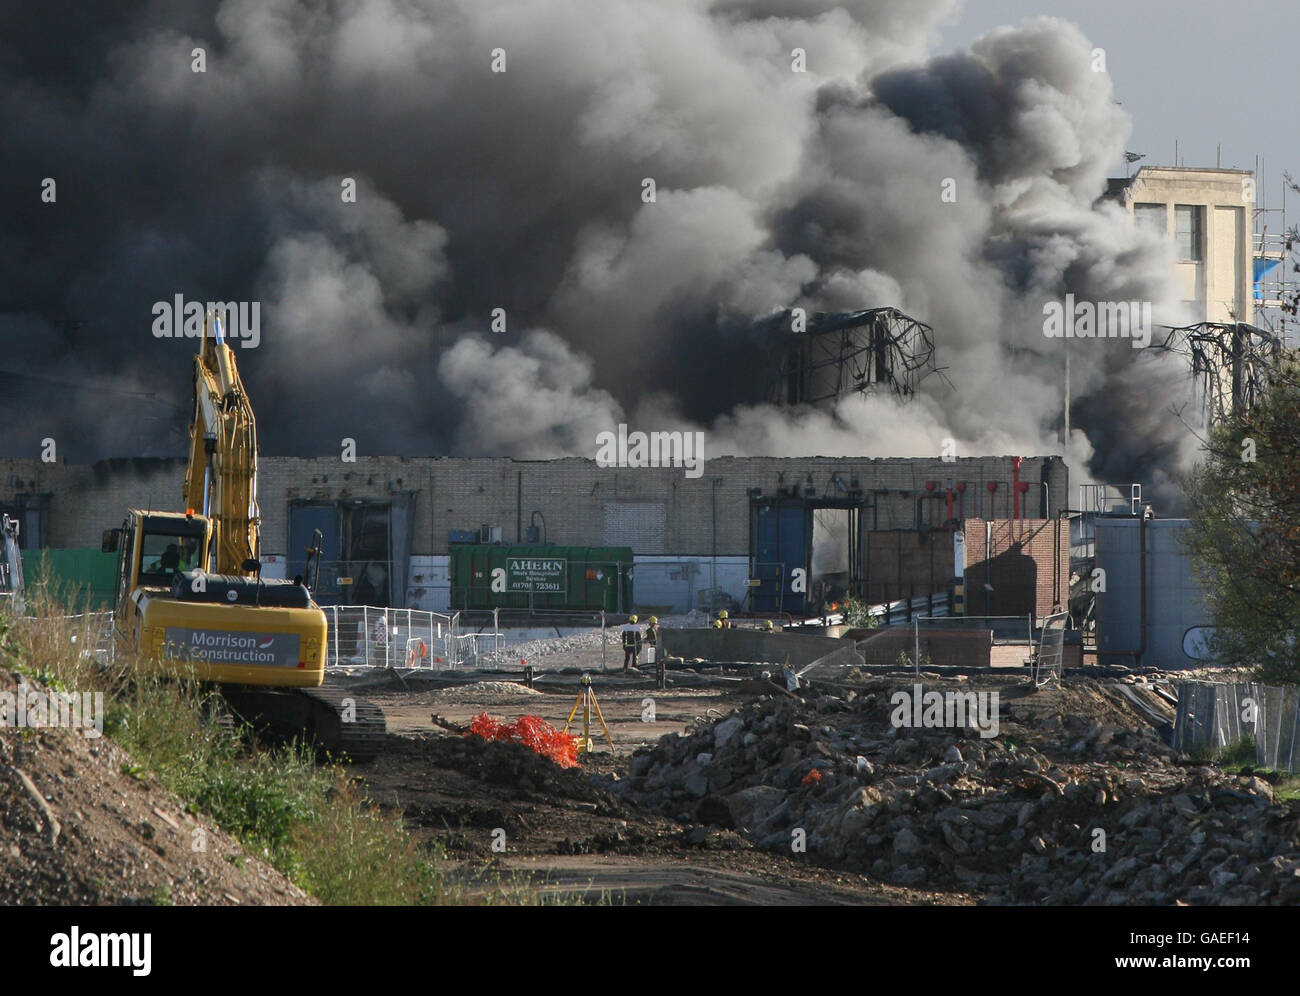 Fire in Stratford. Smoke bellows from a huge fire on the 2012 Olympic site in Stratford, east London. Stock Photo